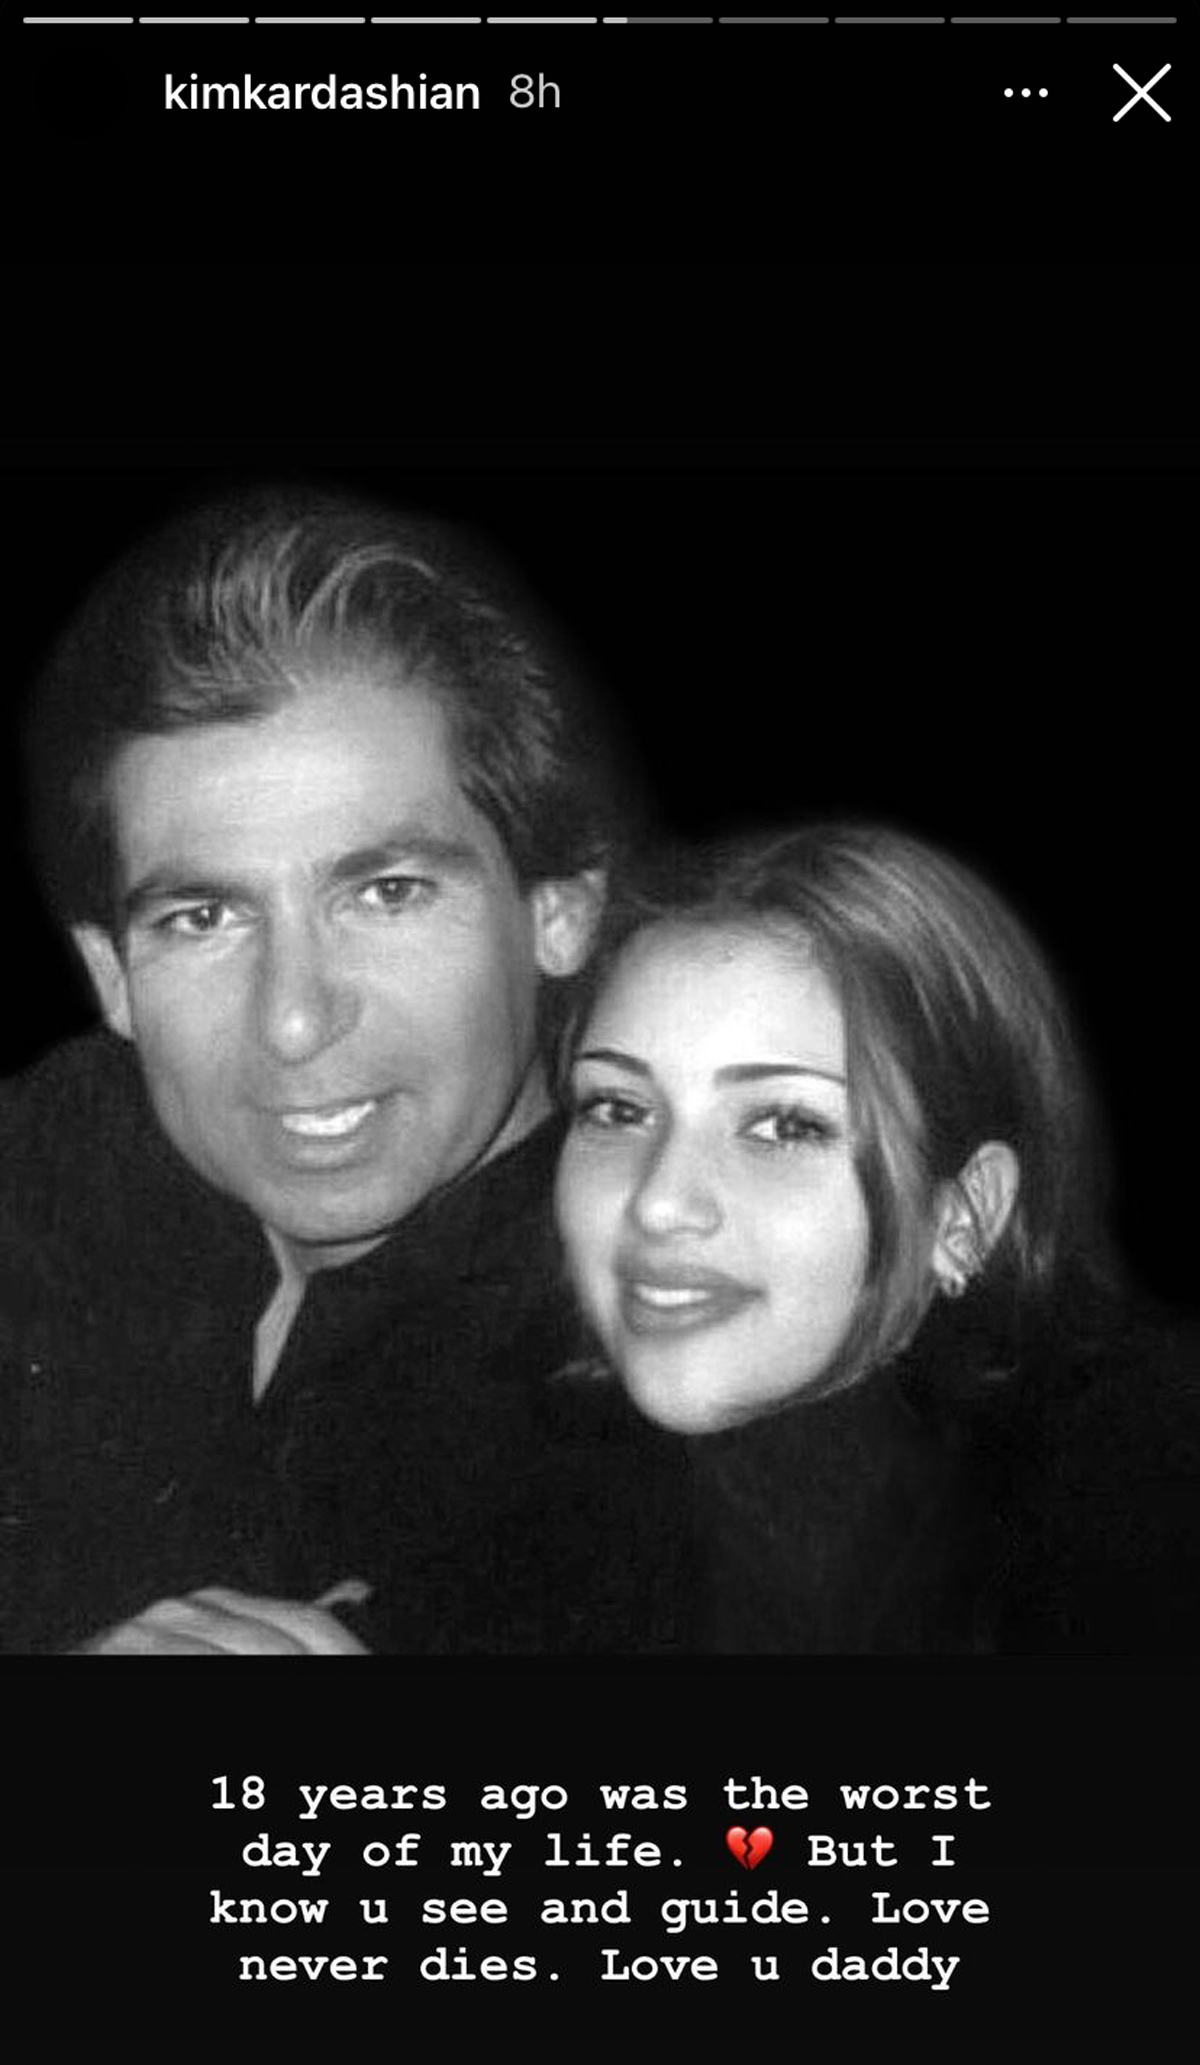 Kim Kardashian Remembers Her Father Robert On The 18th Anniversary Of His Death: ‘I Know You See And Guide’ 